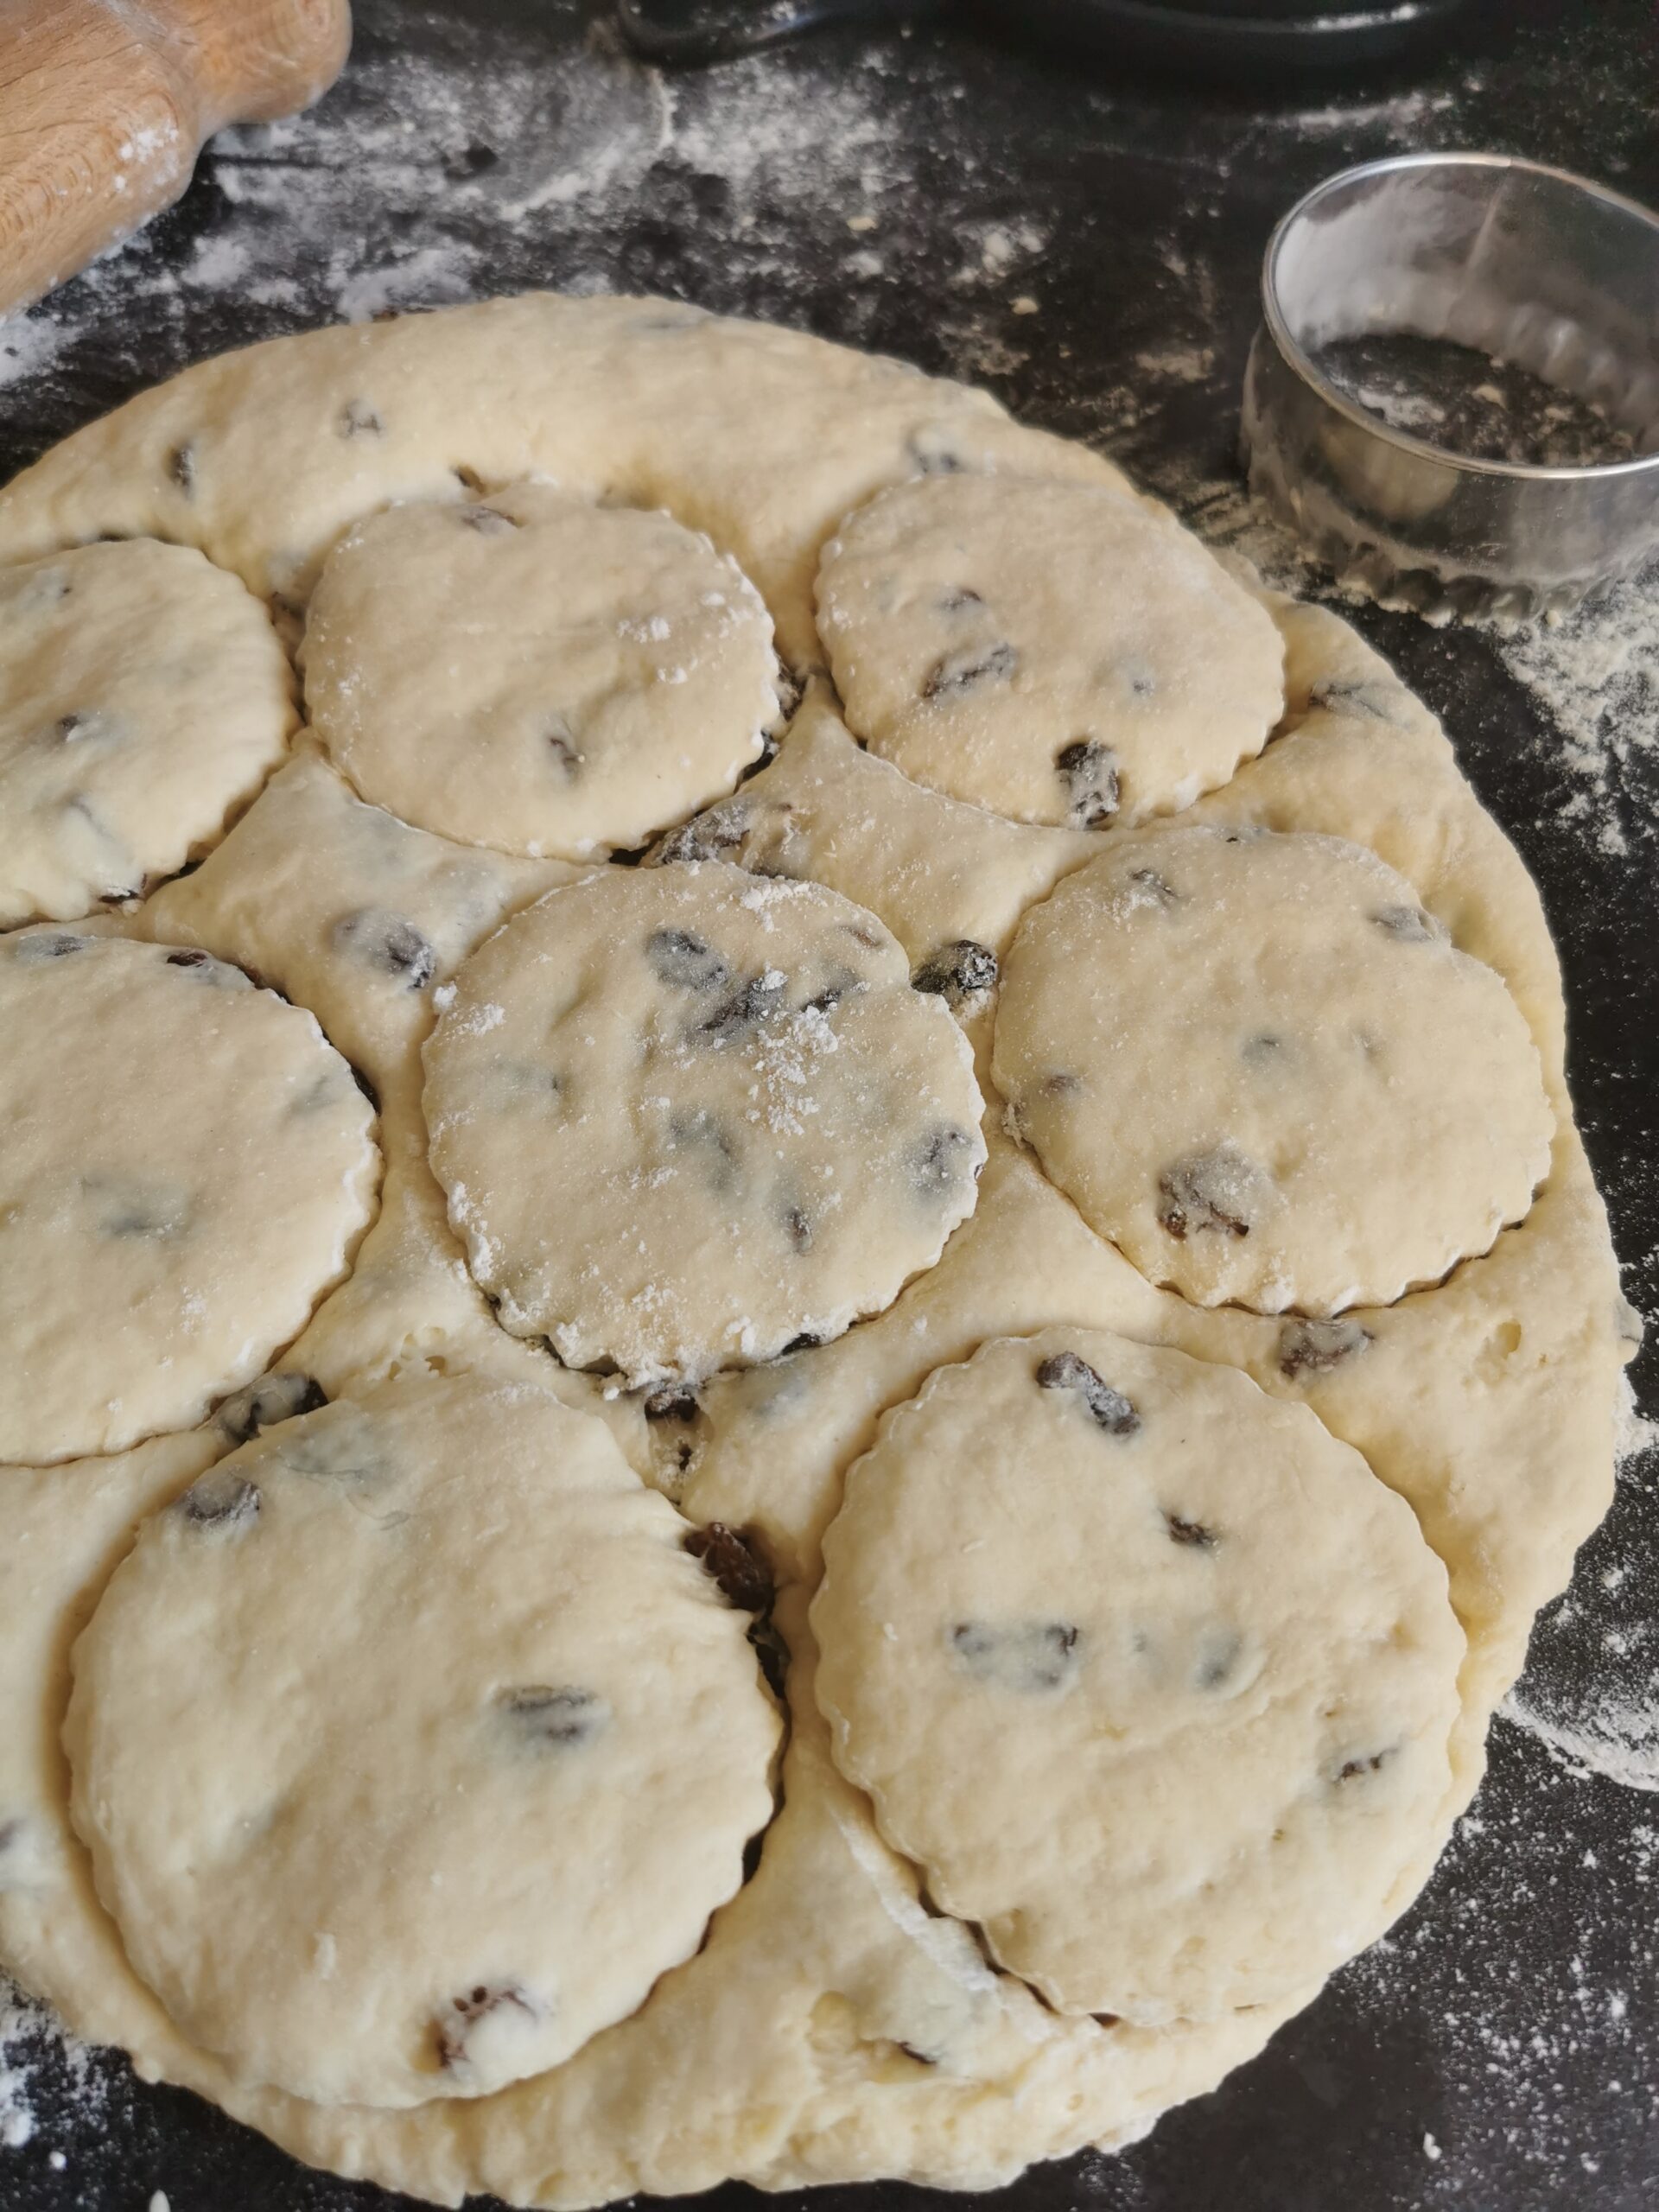 Fruit scone dough being cut into rounds